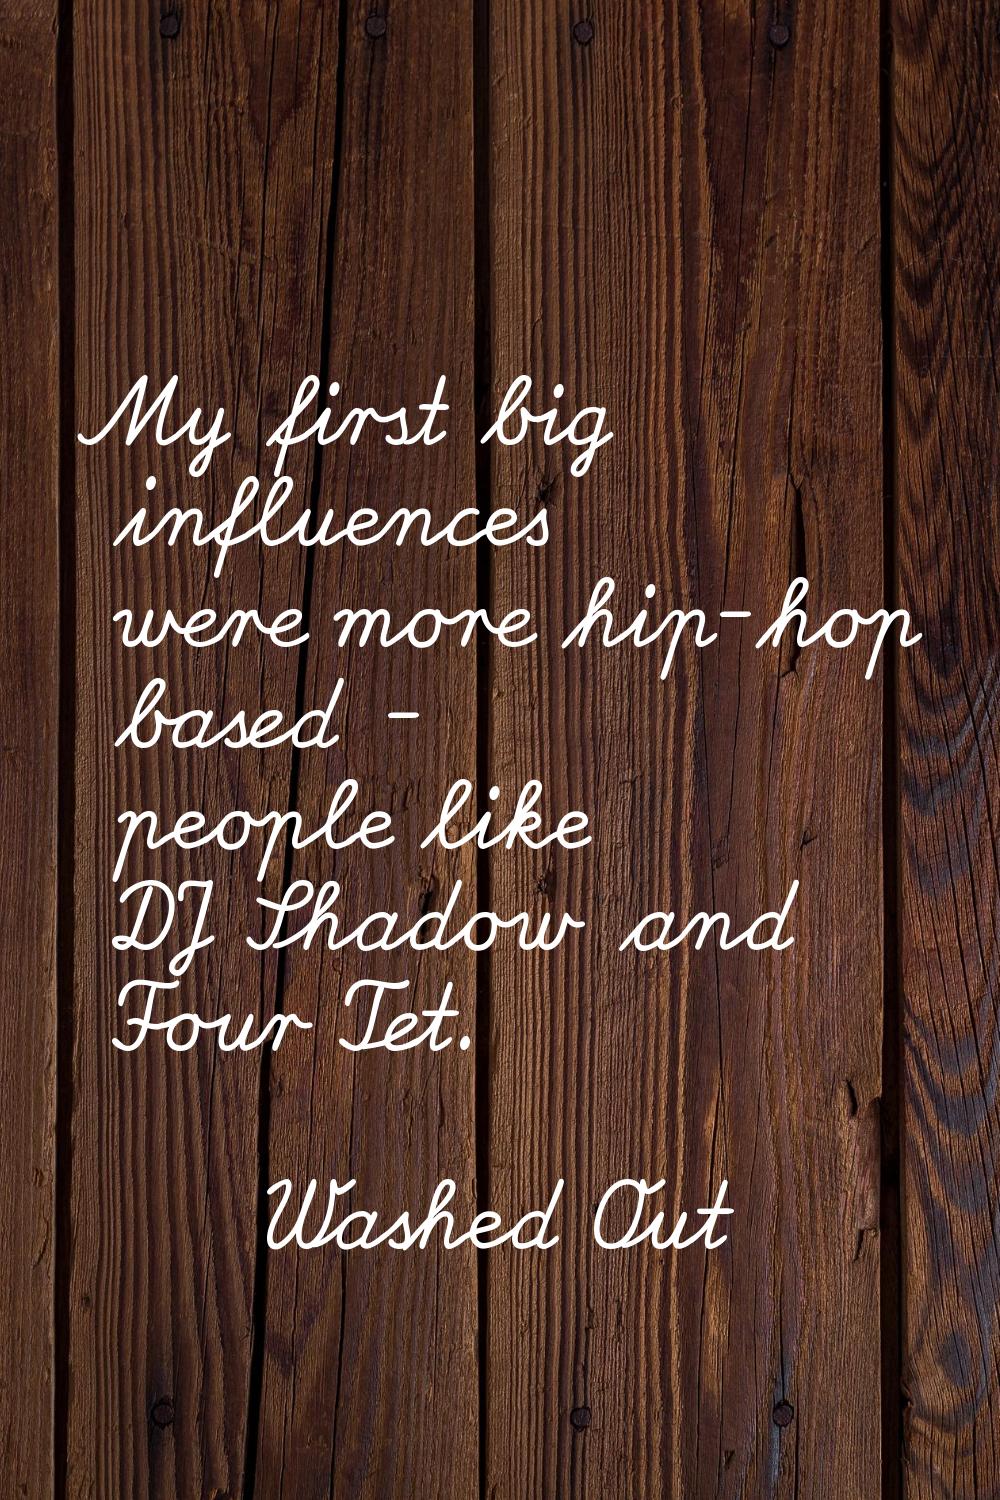 My first big influences were more hip-hop based - people like DJ Shadow and Four Tet.